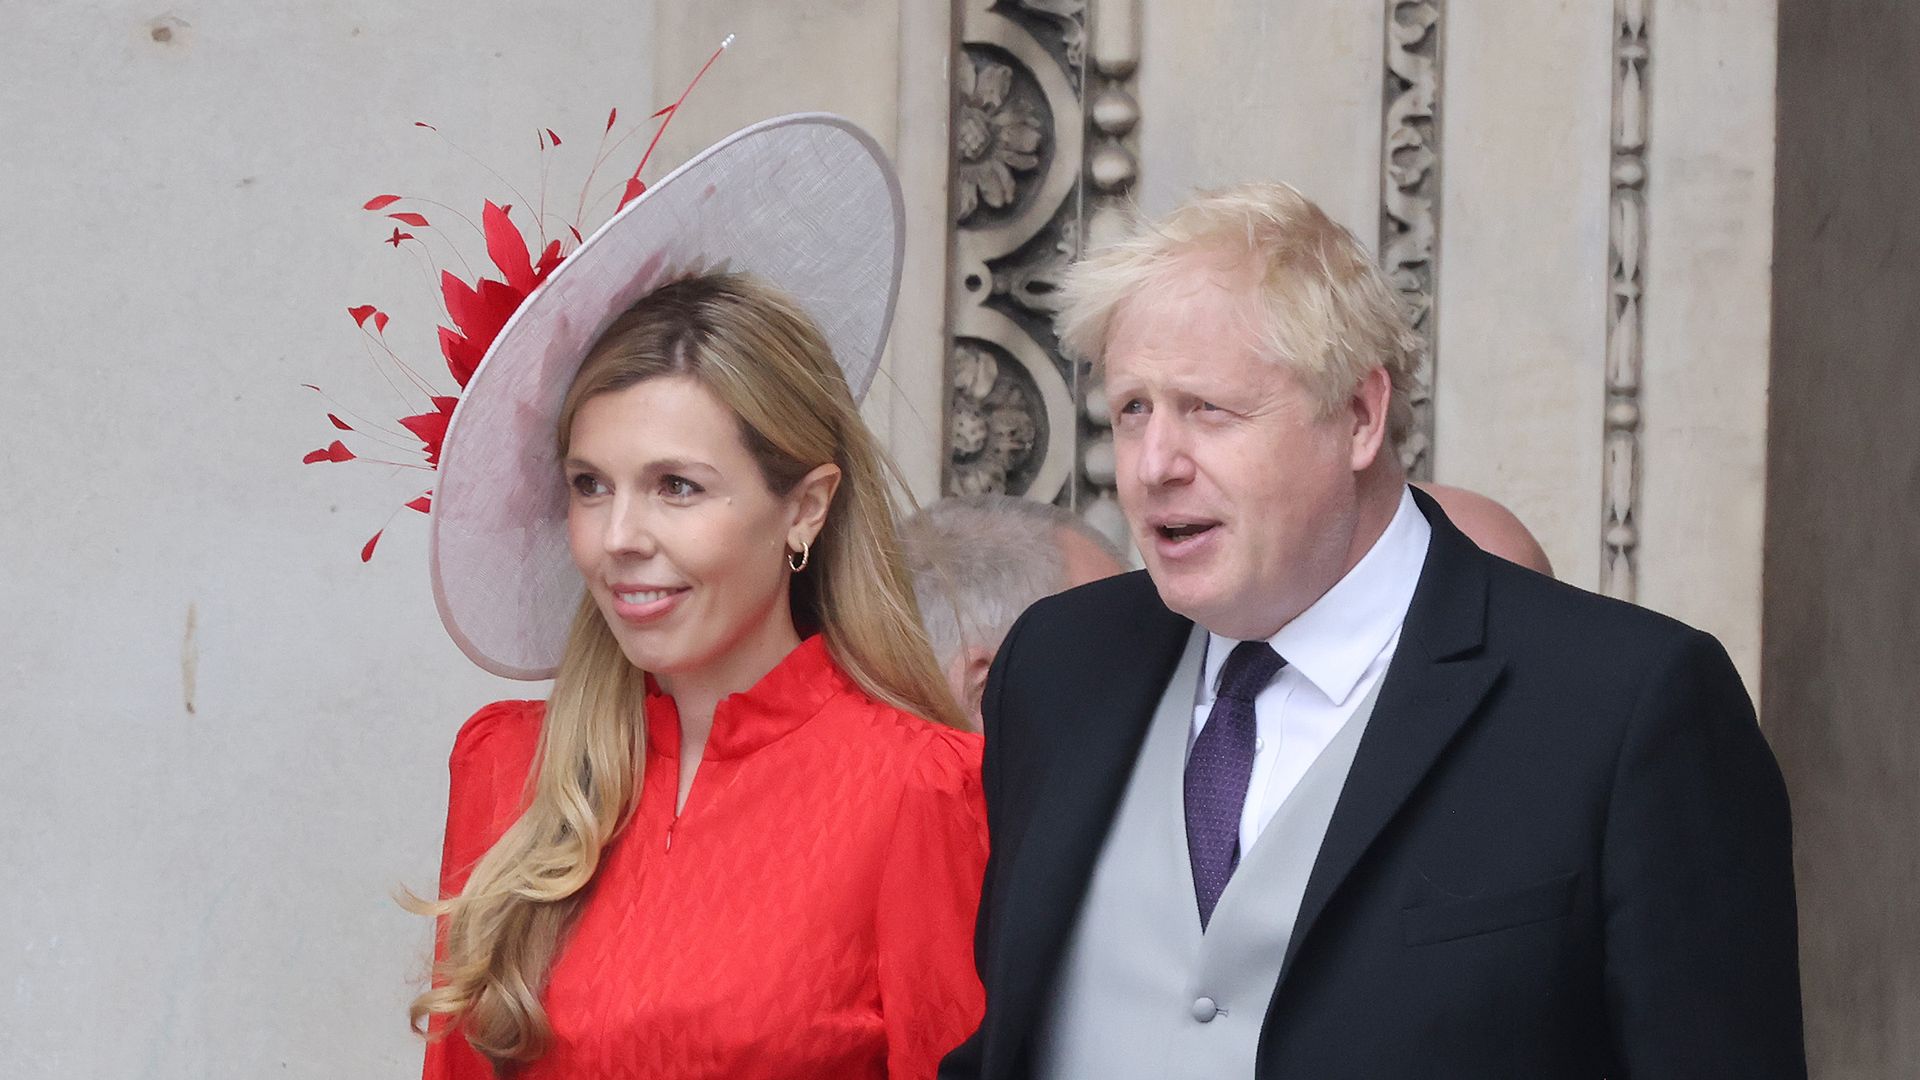 Boris Johnson in a suit and Carrie in red dress leaving St Paul's Cathedral